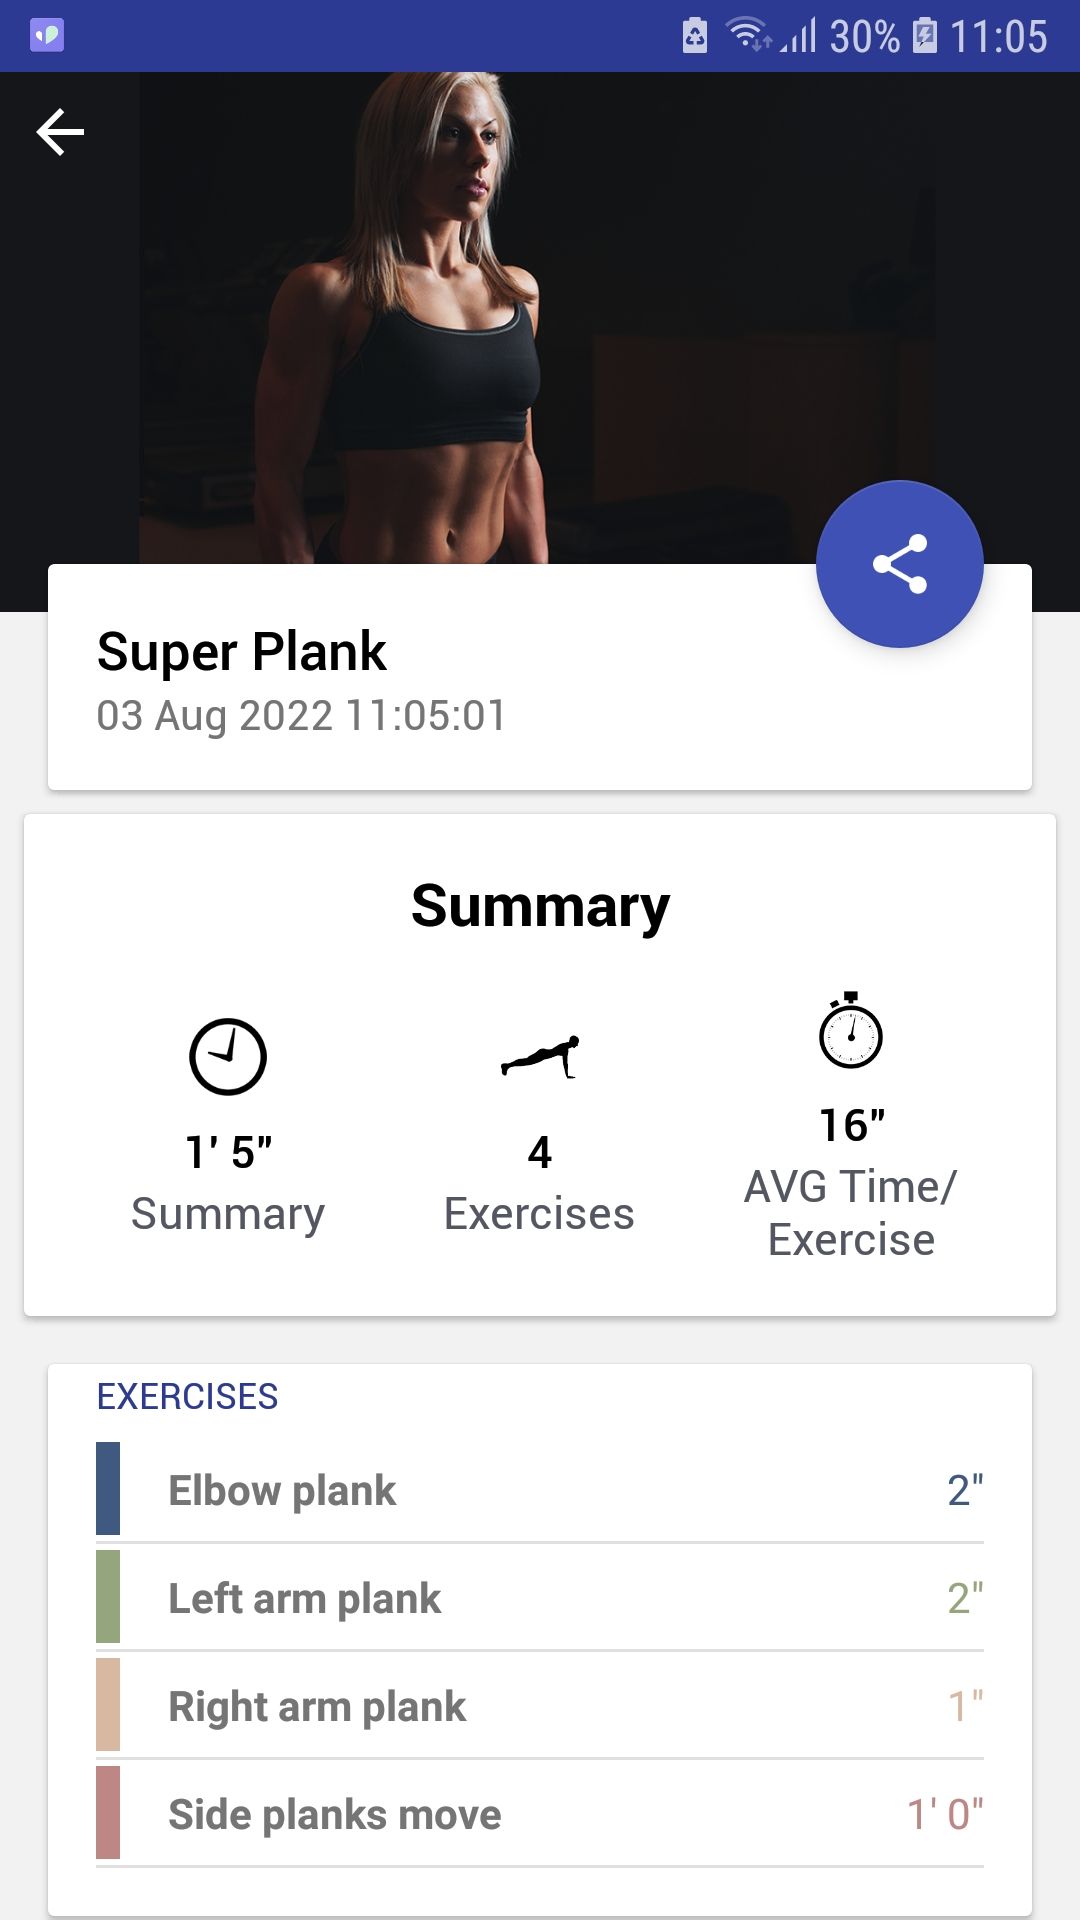 5 Minute Plank mobile exercise app summary